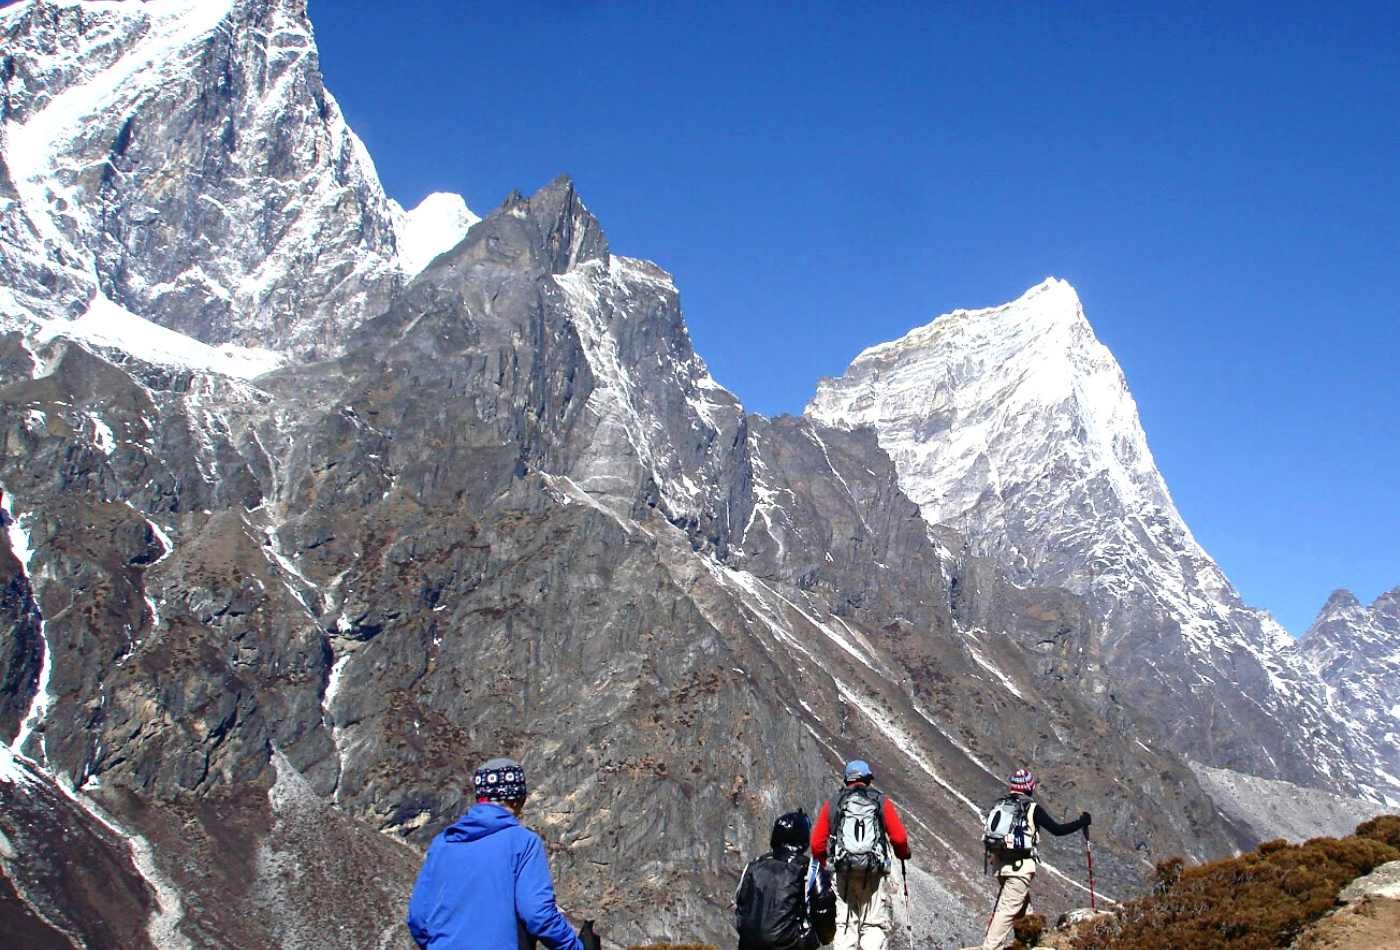 A view of Cholatse Peak during the Everest Base Camp Trek with a group of trekkers walking on a rocky trail surrounded by mountains and snowy peaks. 